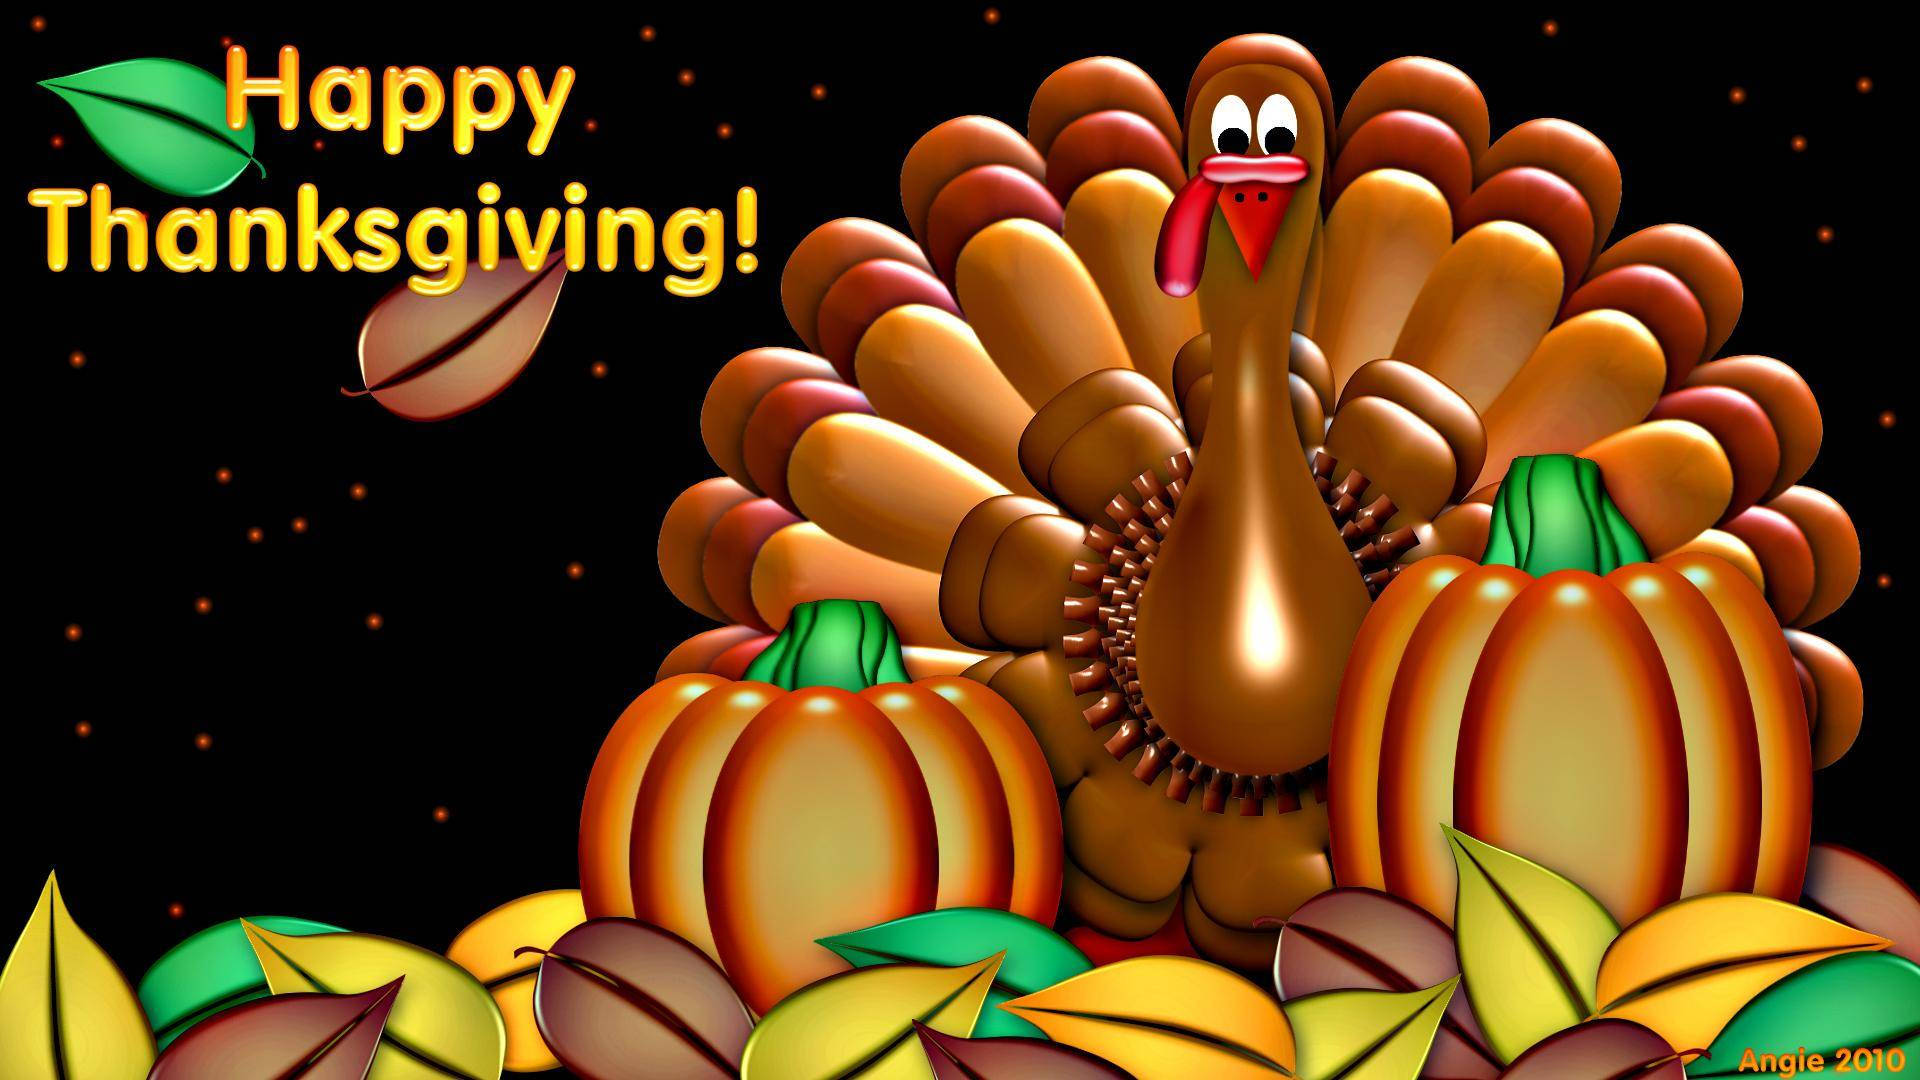 Celebrate Thanksgiving With A Roast Turkey Wallpaper